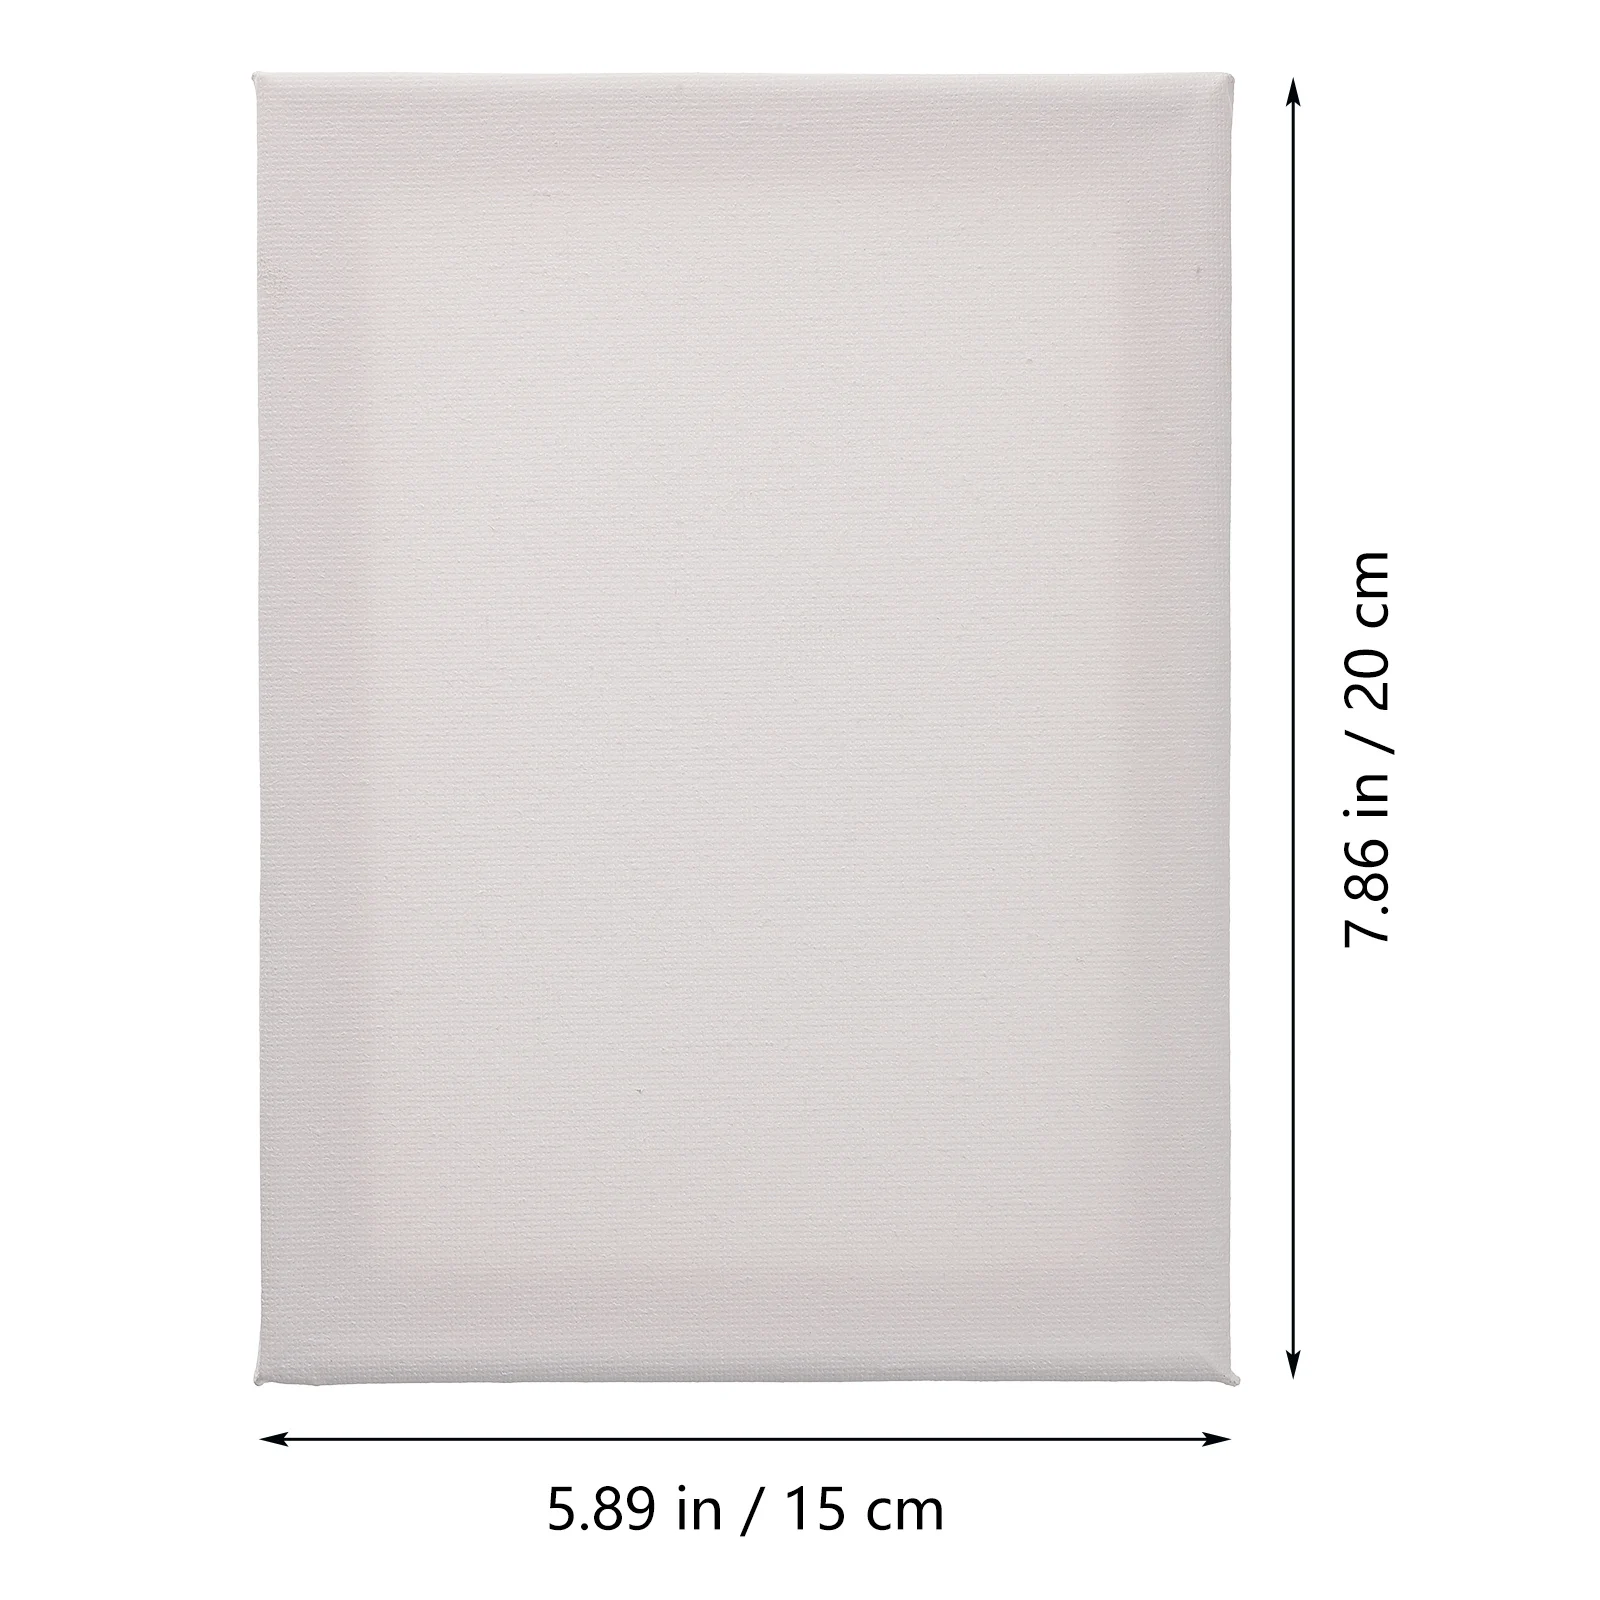 5Pcs Blank Canvas Board Paint Oil Painting Supplies Framed Watercolor Canvases For Tiny ( 20 X 15 Cm) Rectangle Blank Canvases